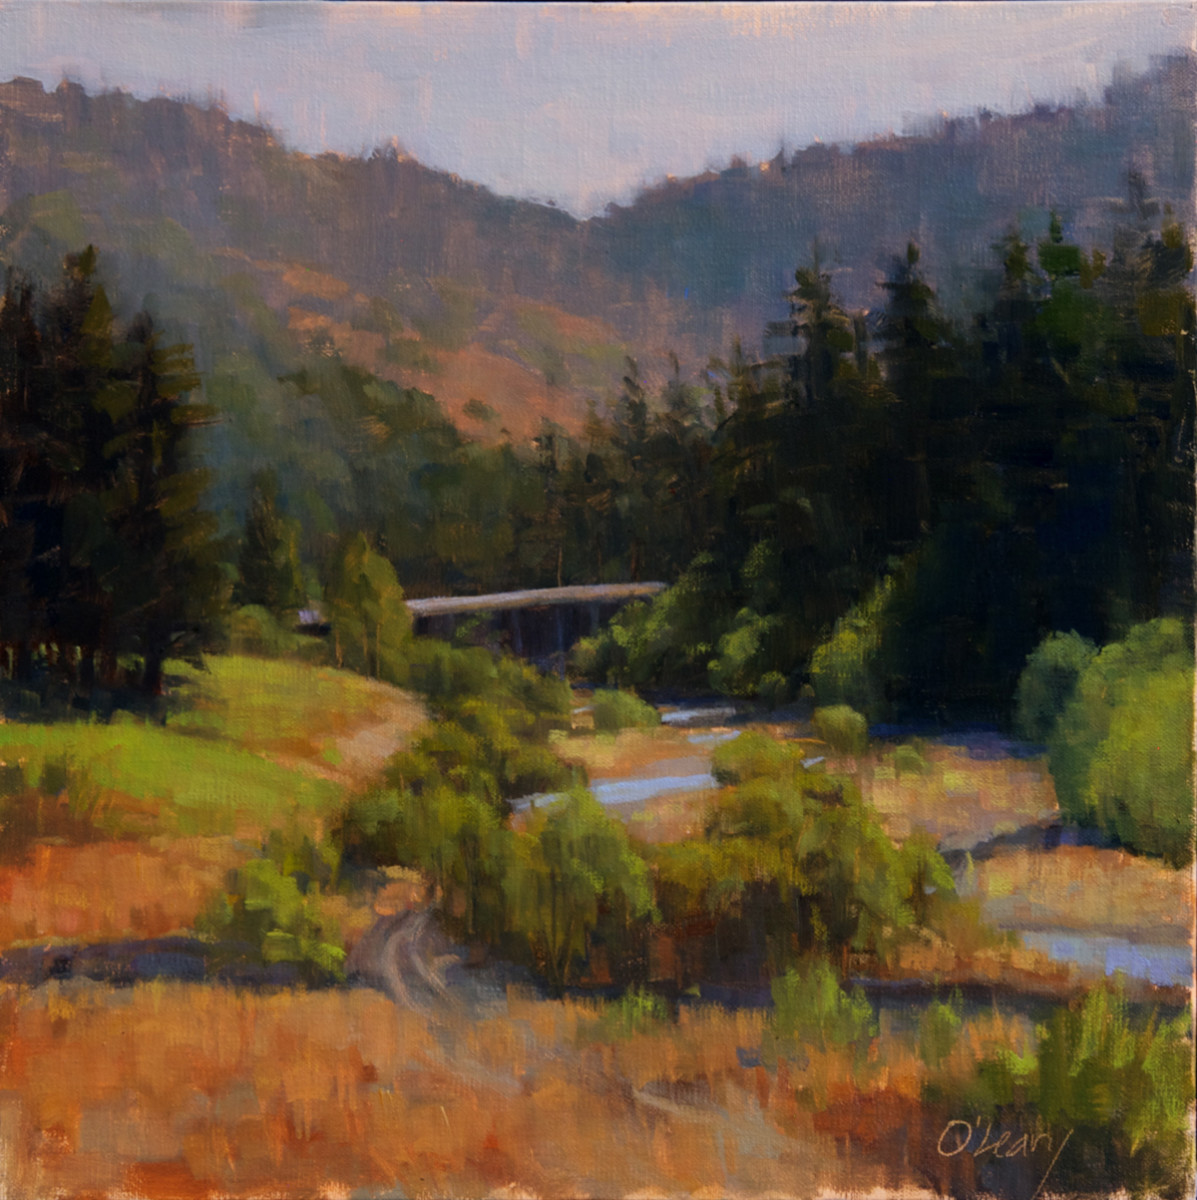 Eel River in Morning Light ("Quick Draw") by Kathy O'Leary 